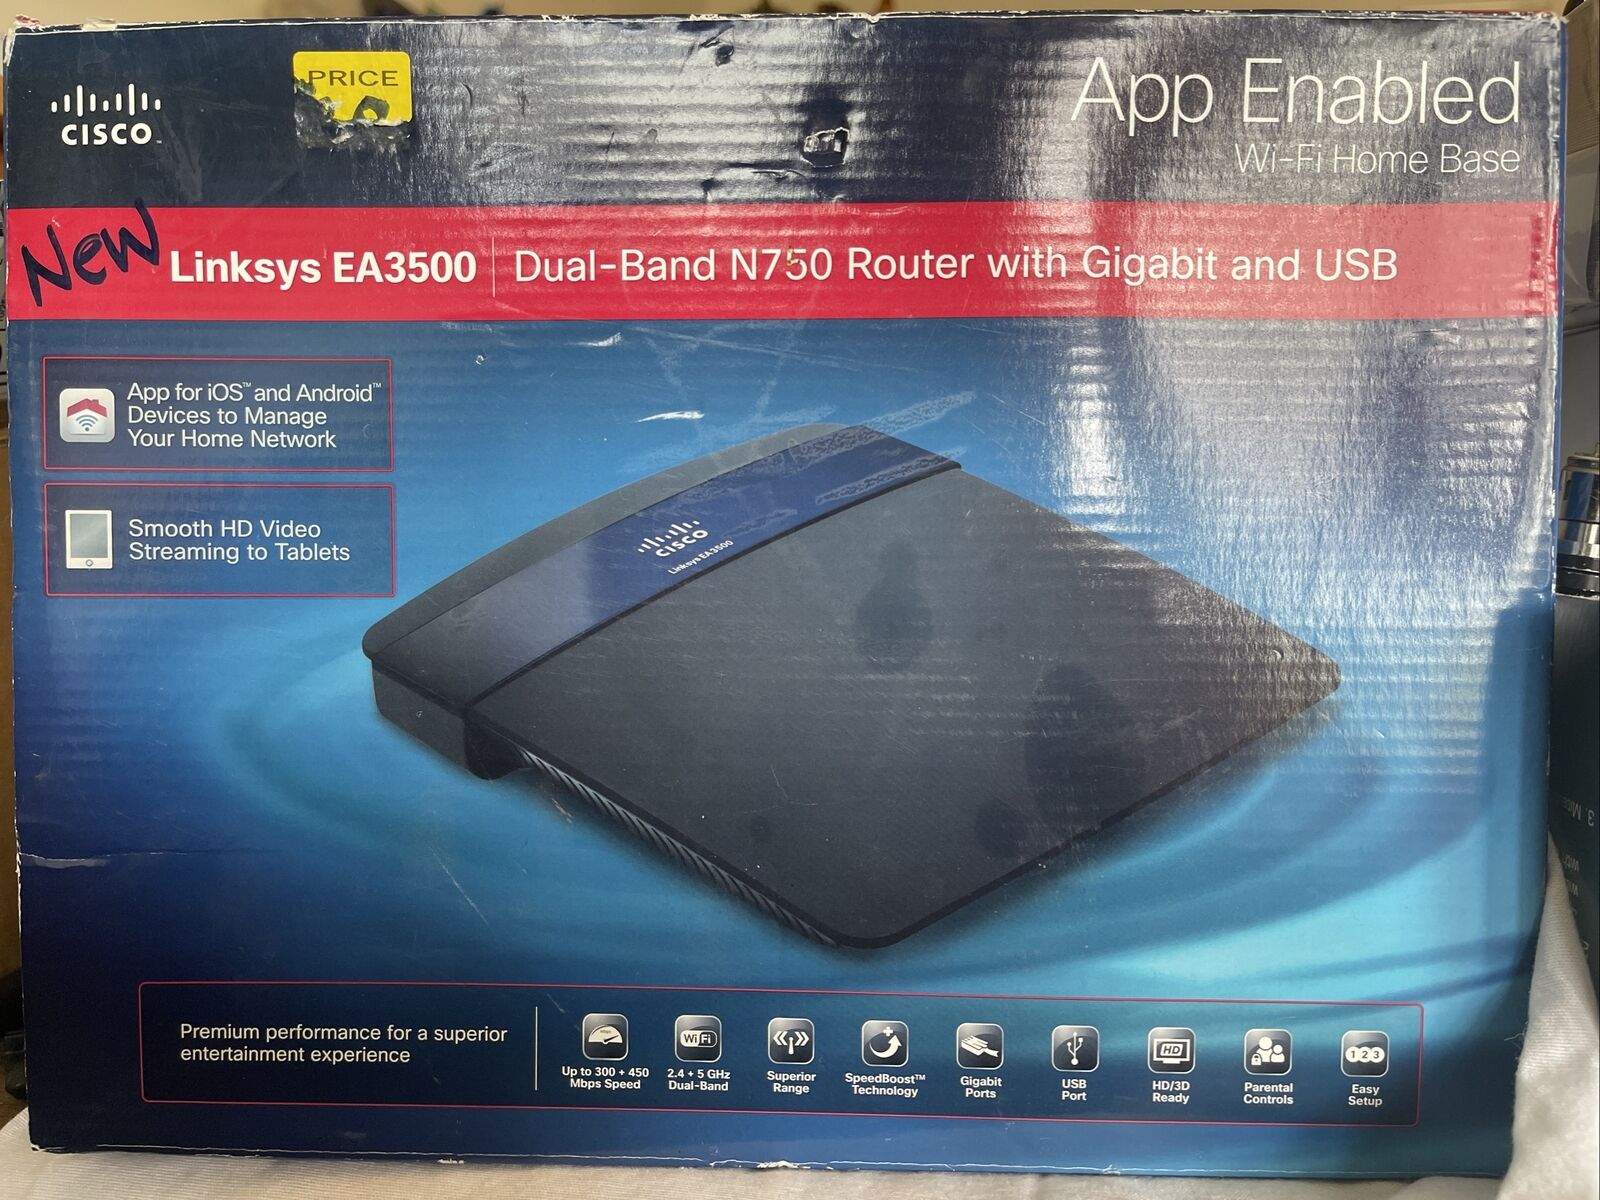 Linksys EA3500 N750 Dual-Band Smart Wi-Fi Router with Gigabit Ethernet and USB